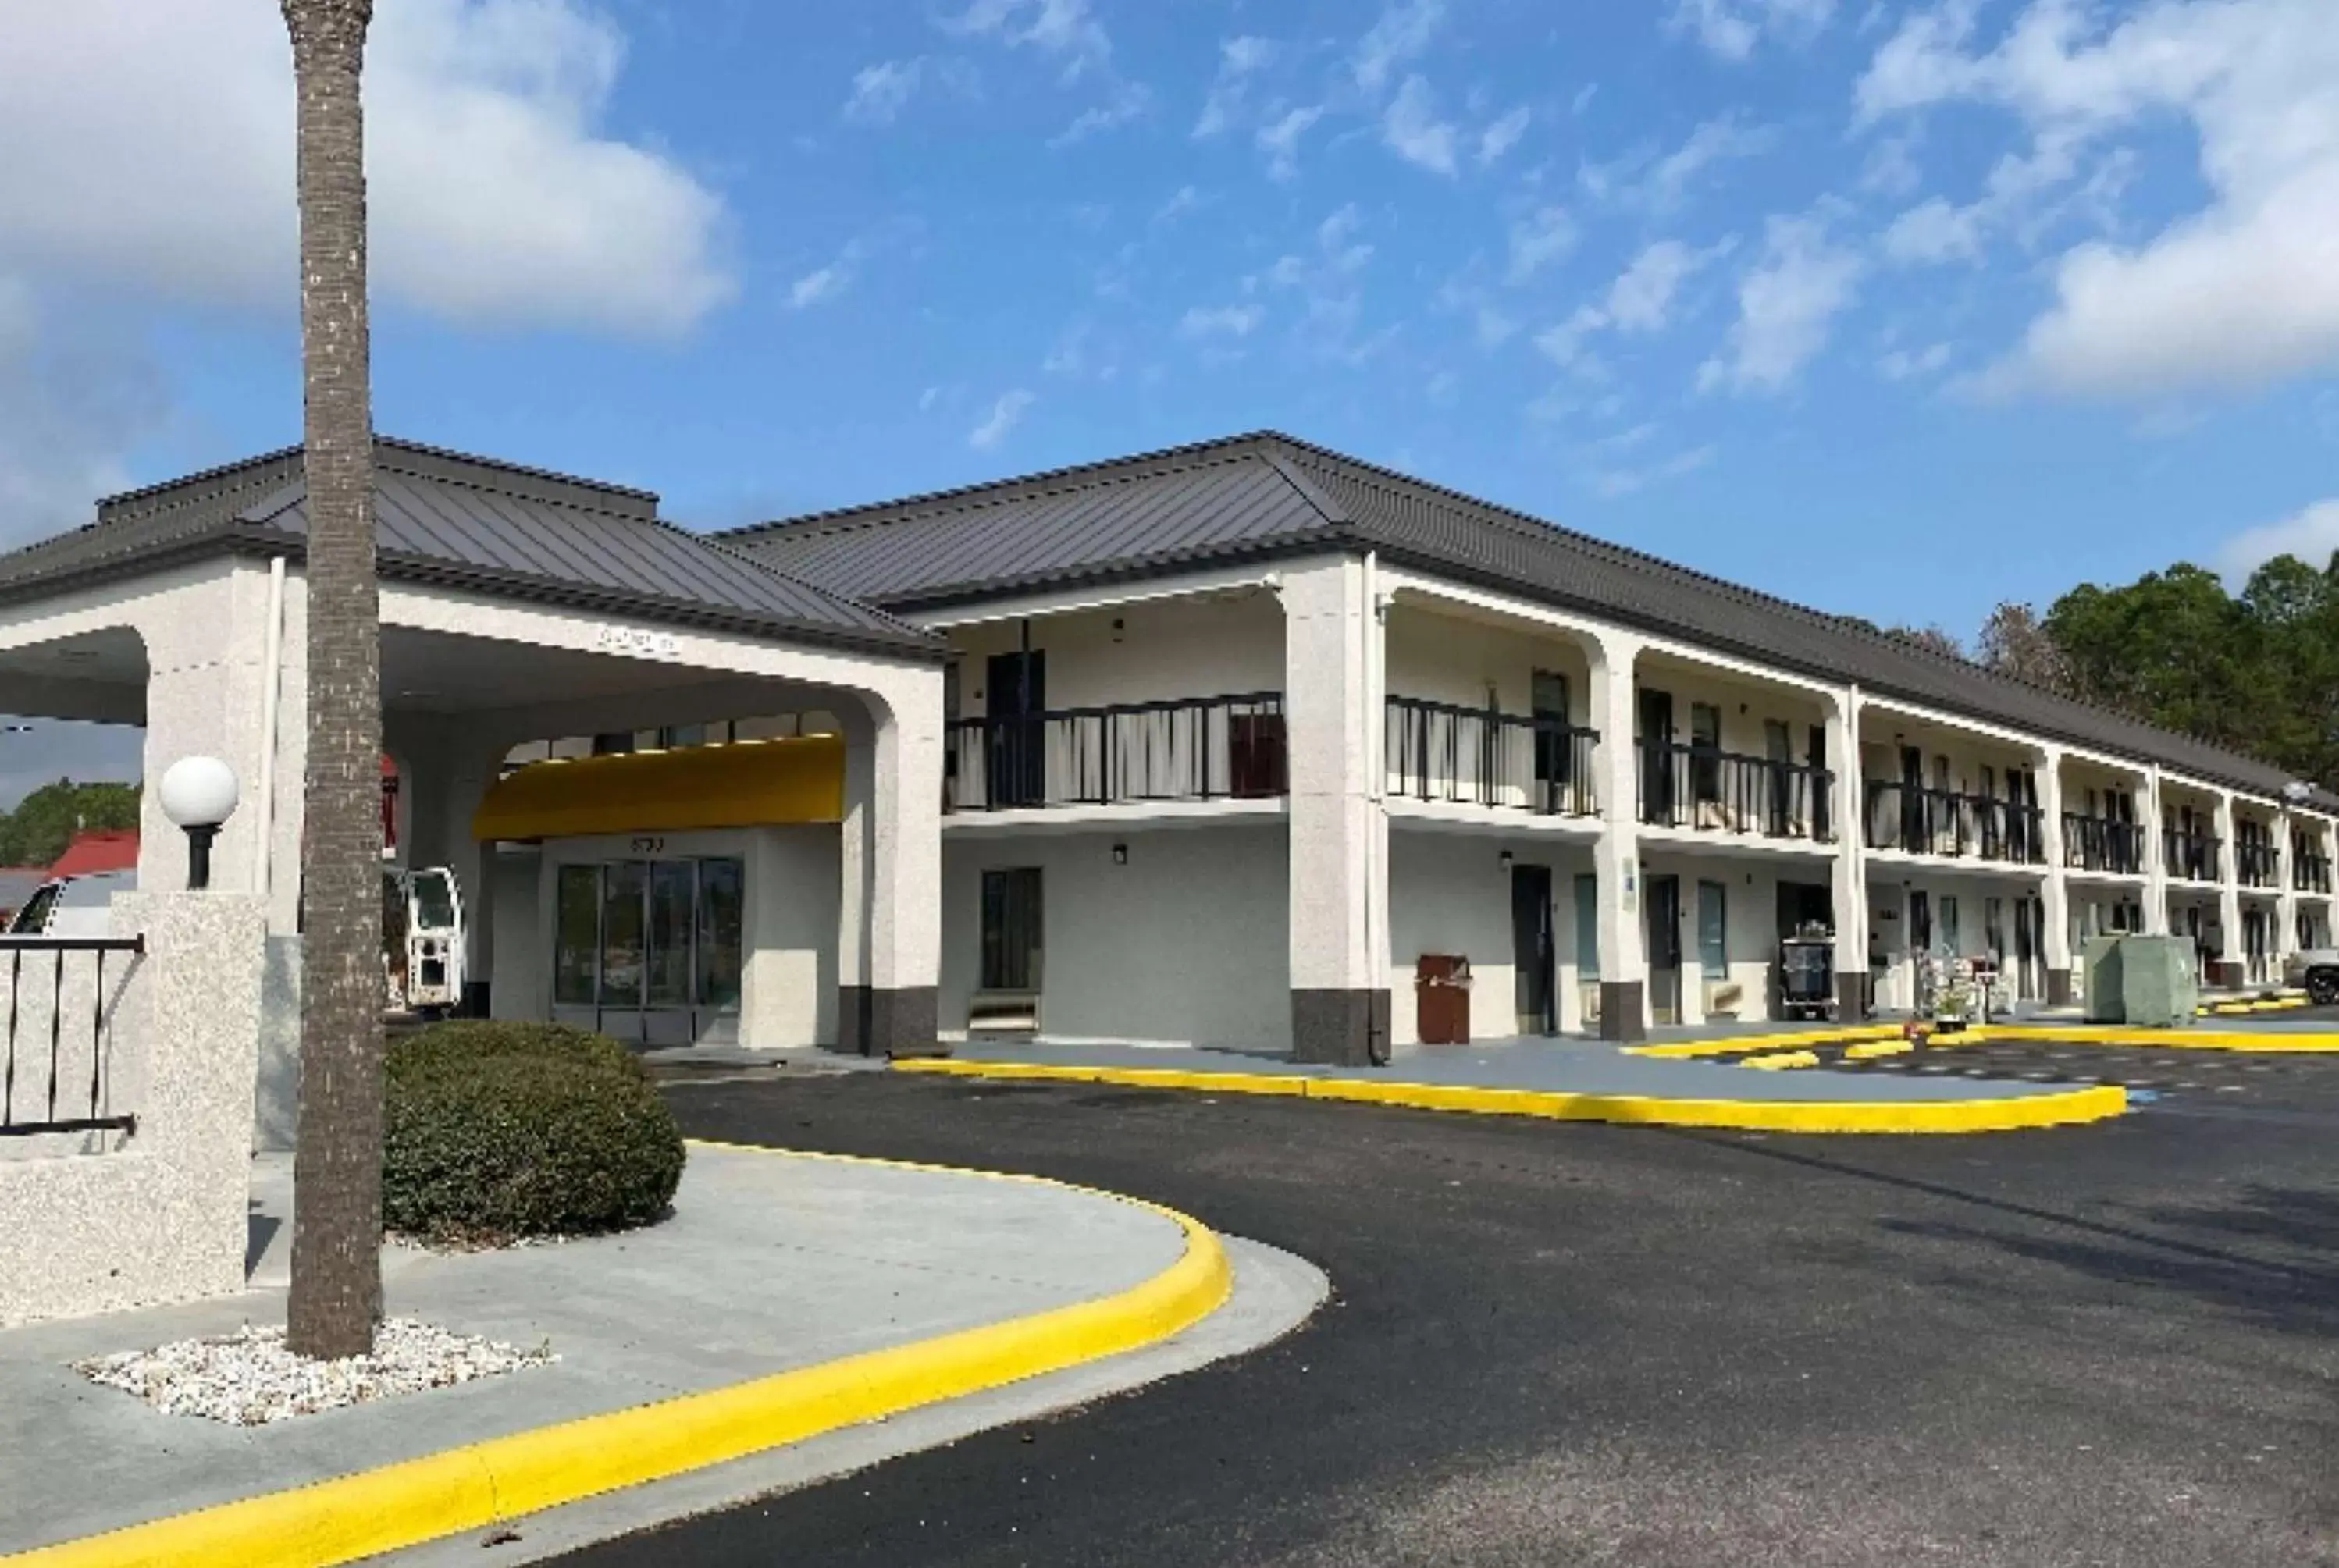 Property Building in Days Inn by Wyndham Moss Point Pascagoula